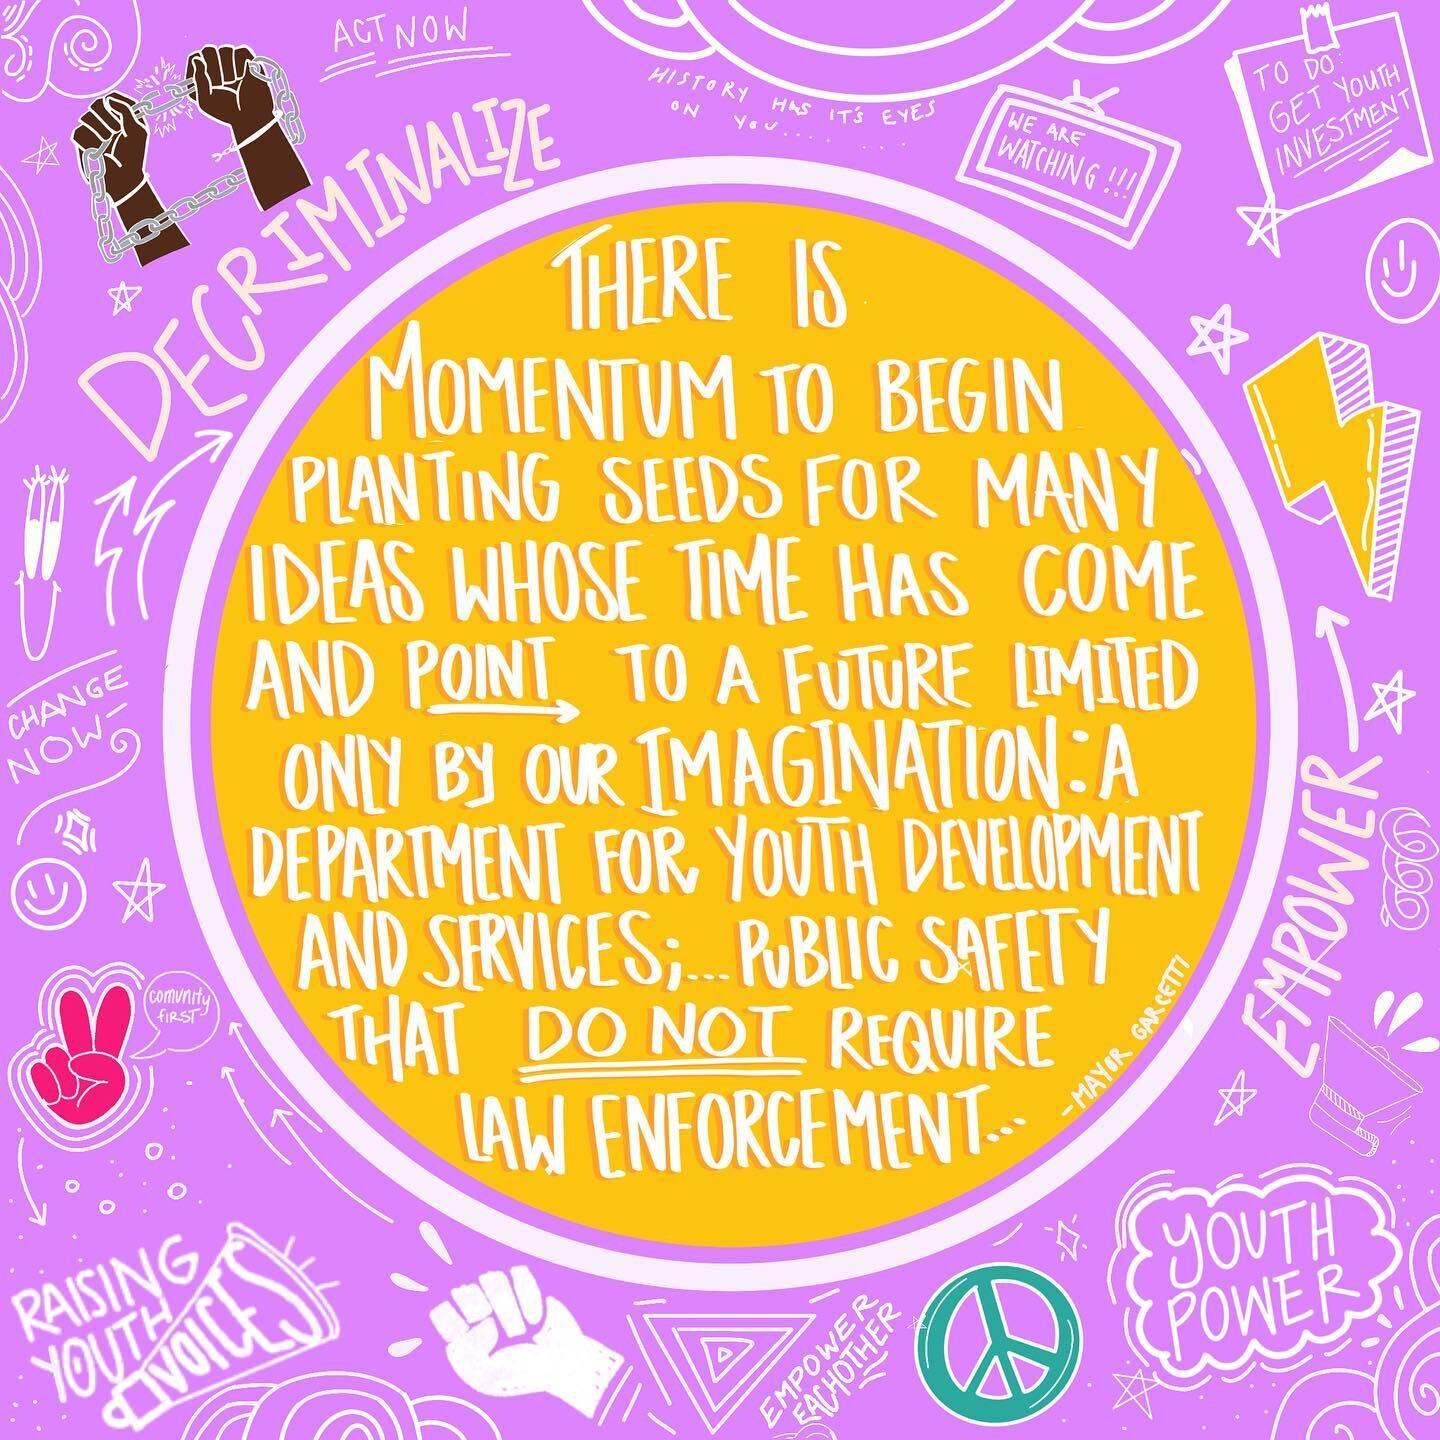 Mayor Eric Garcetti encourages City Council to support the creation of a Youth Department! We need a department that focuses on Youth Employment and Youth Empowerment. This is long overdue, our youth don&rsquo;t need to be criminalized but rather inv